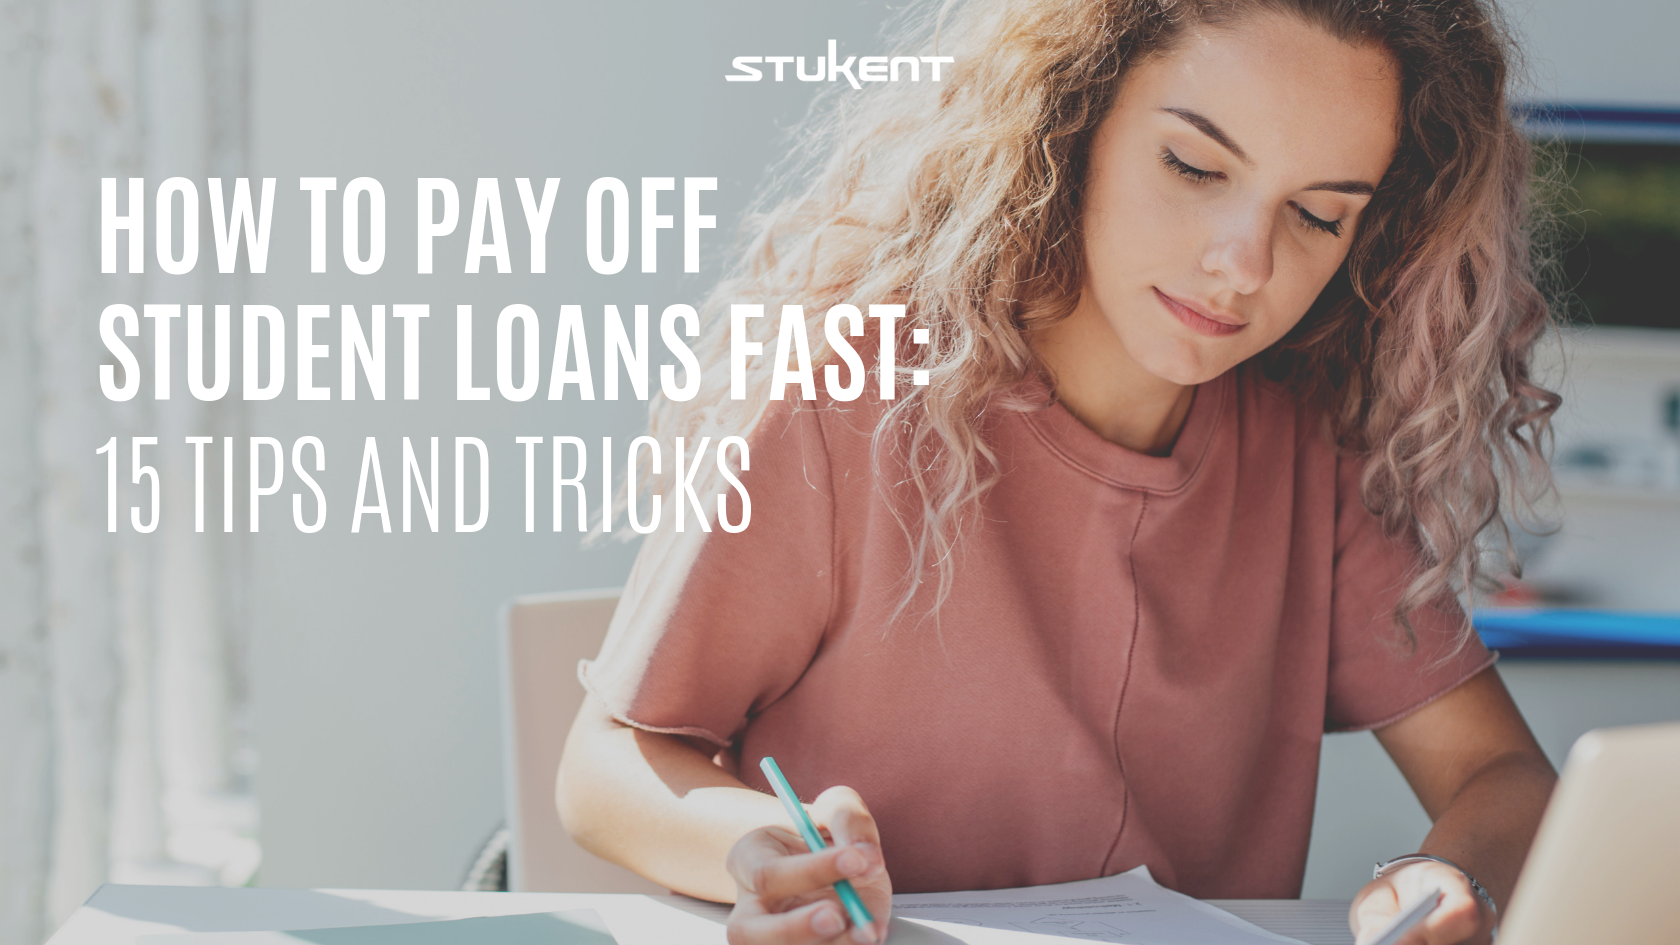 How to Pay Off Student Loans Fast: 15 Tips and Tricks